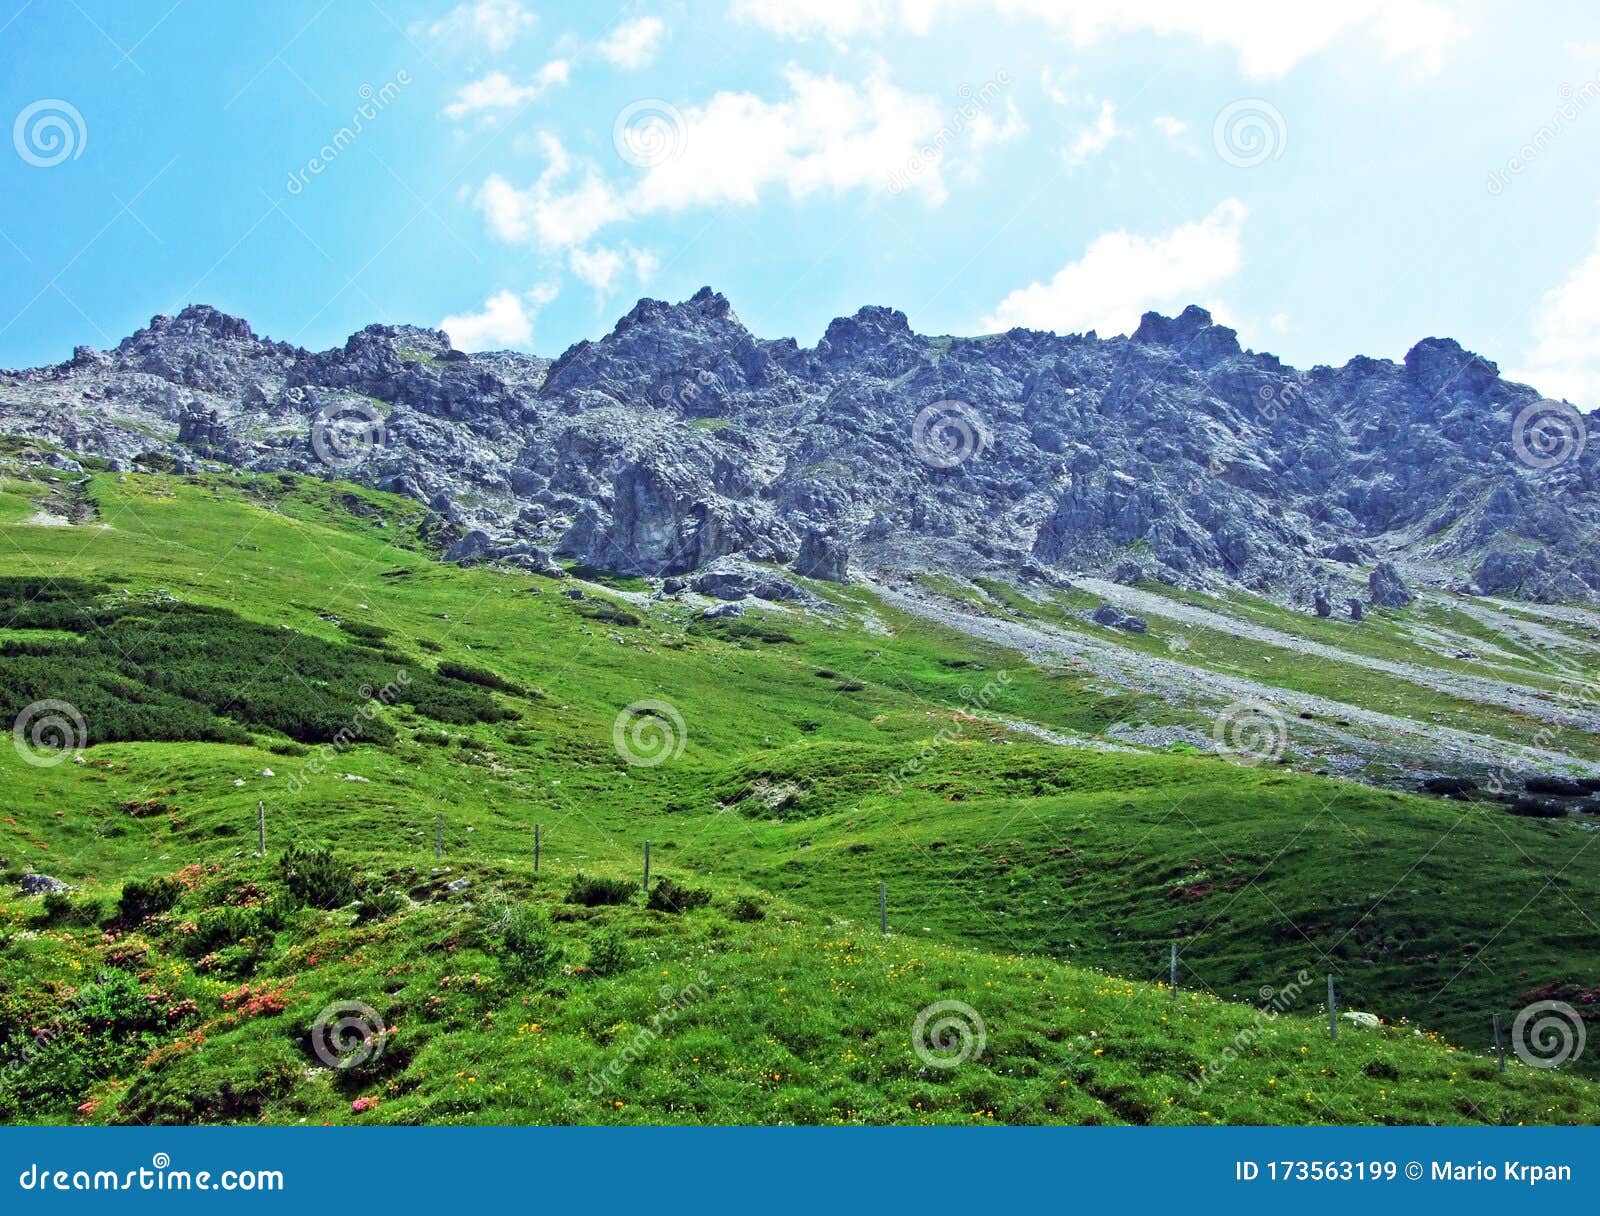 Rocks and Stones of the Liechtenstein Alps Mountain Range and Over the ...